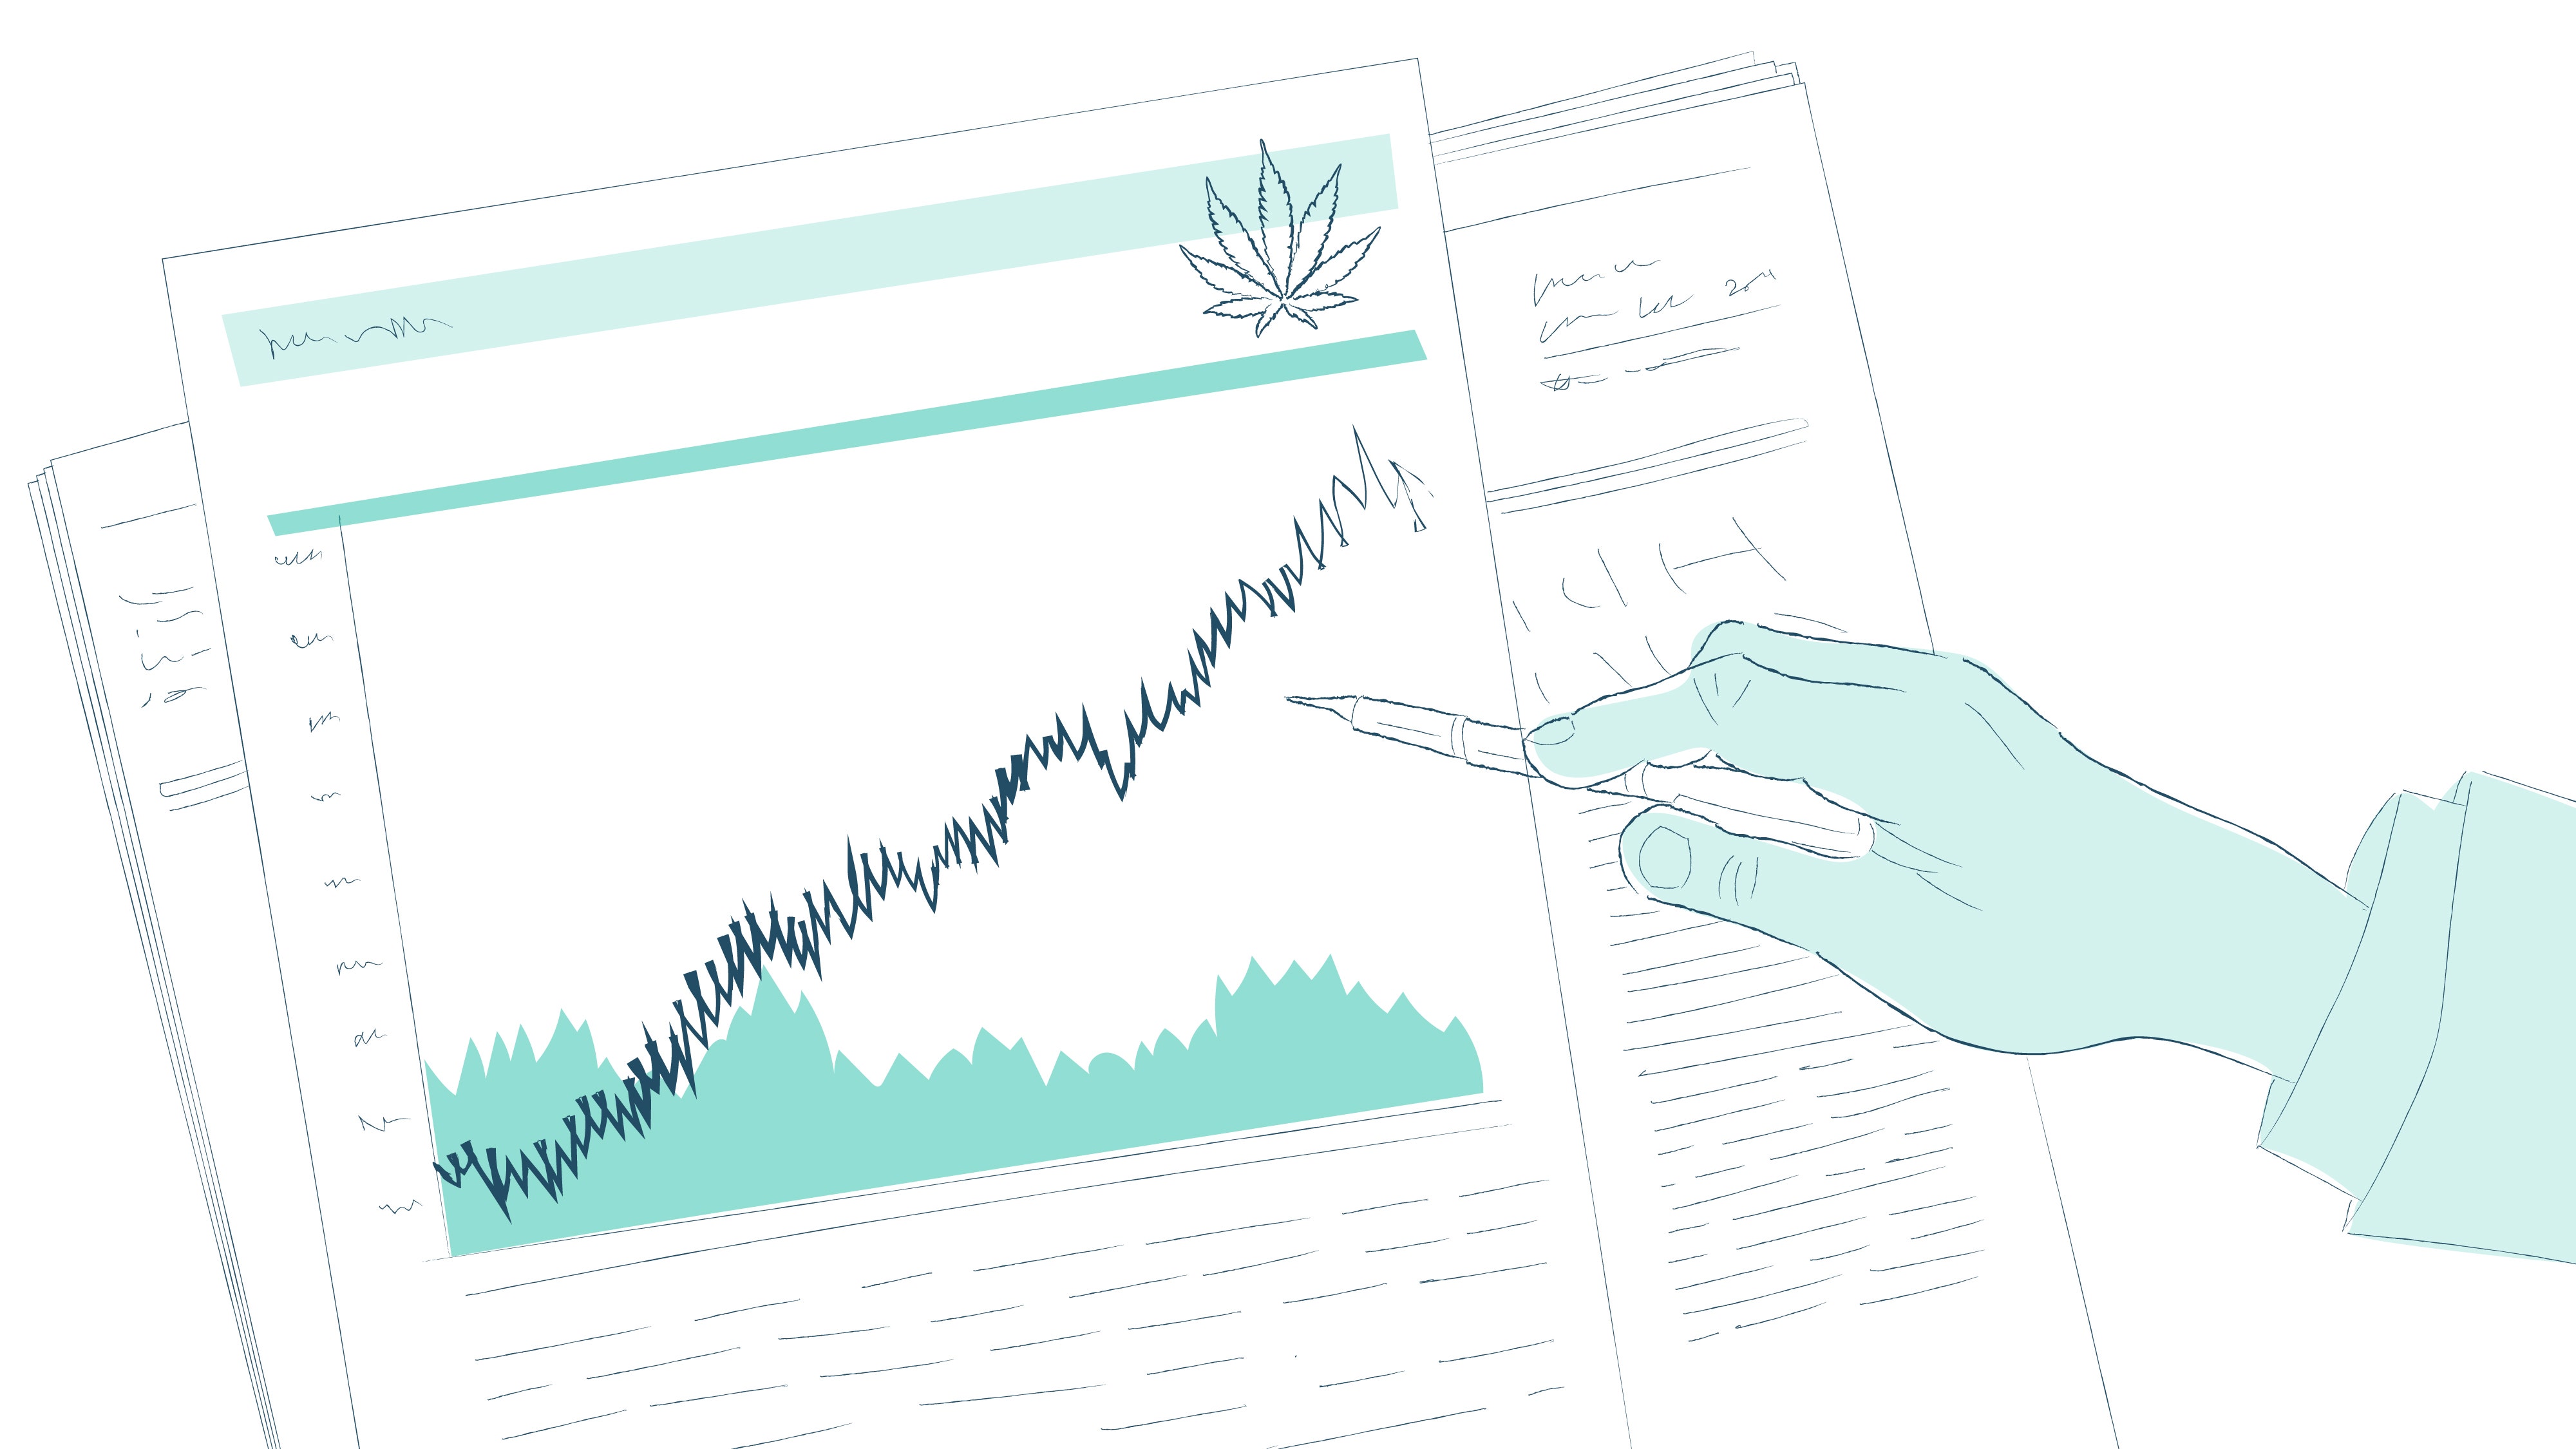 Sundial Growers, TerrAscend, MariMed And MedMen Among Top Cannabis Stock Movers On June 29, 2021